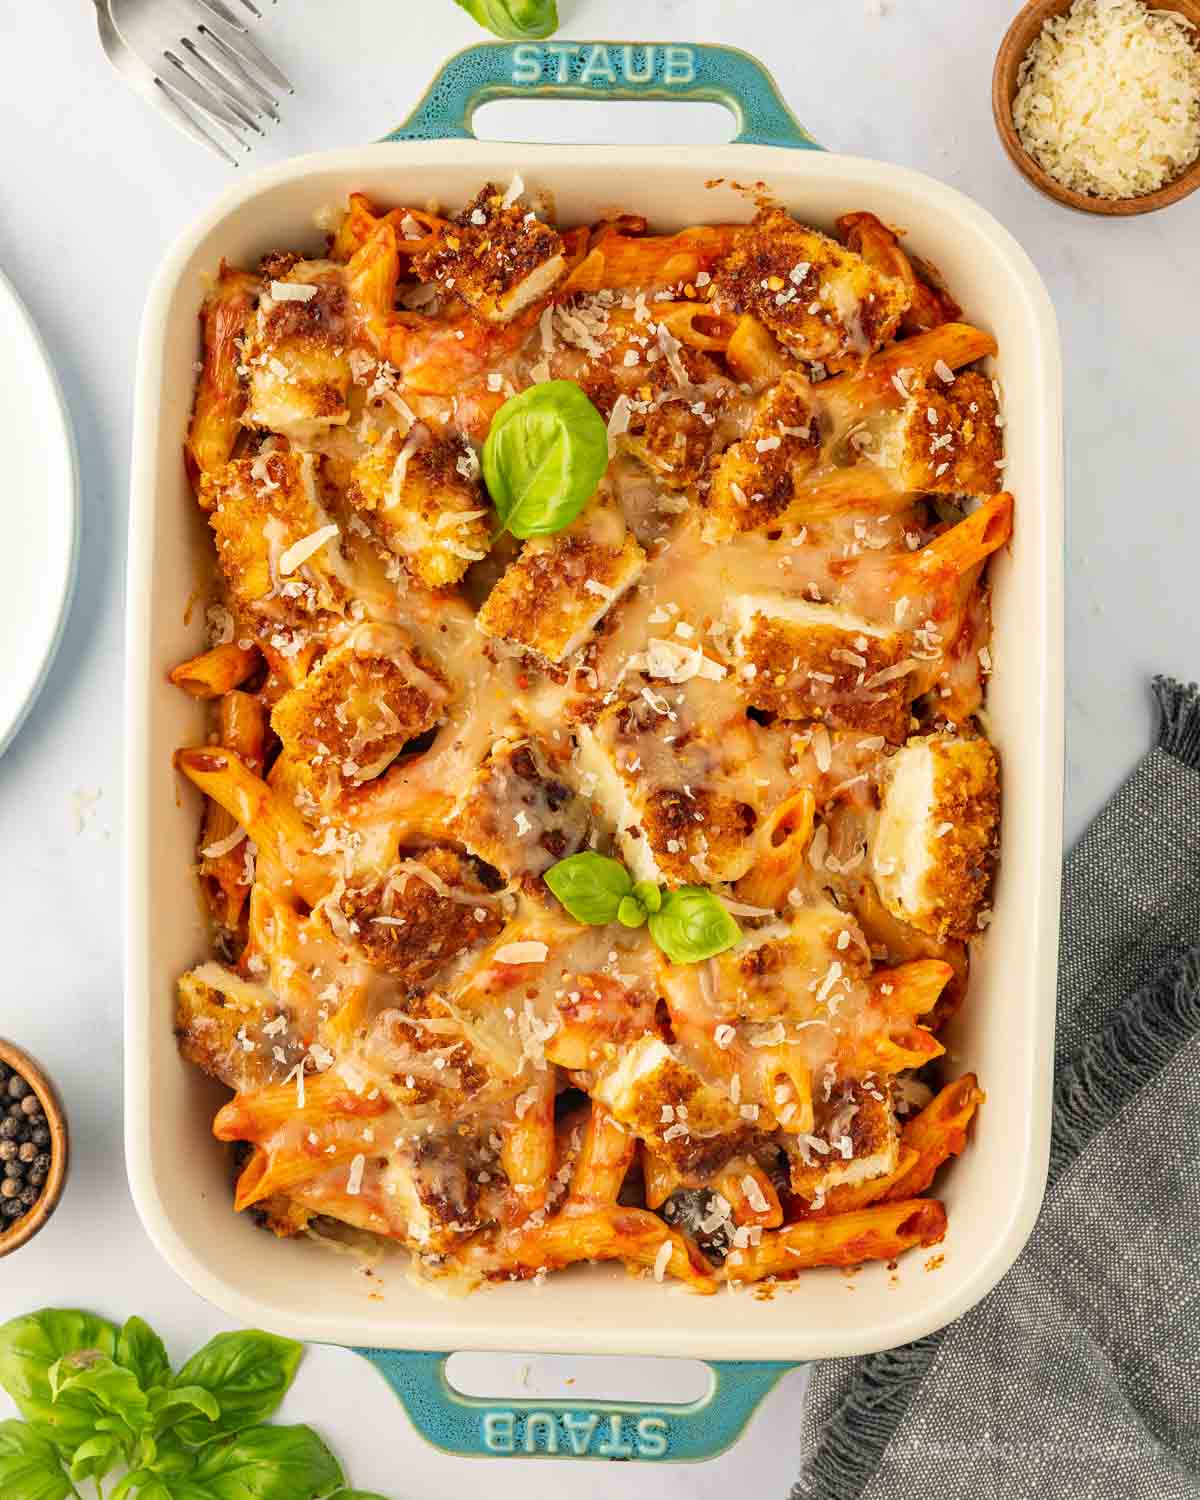 Baked chicken parmesan pasta casserole garnished with basil leaves.